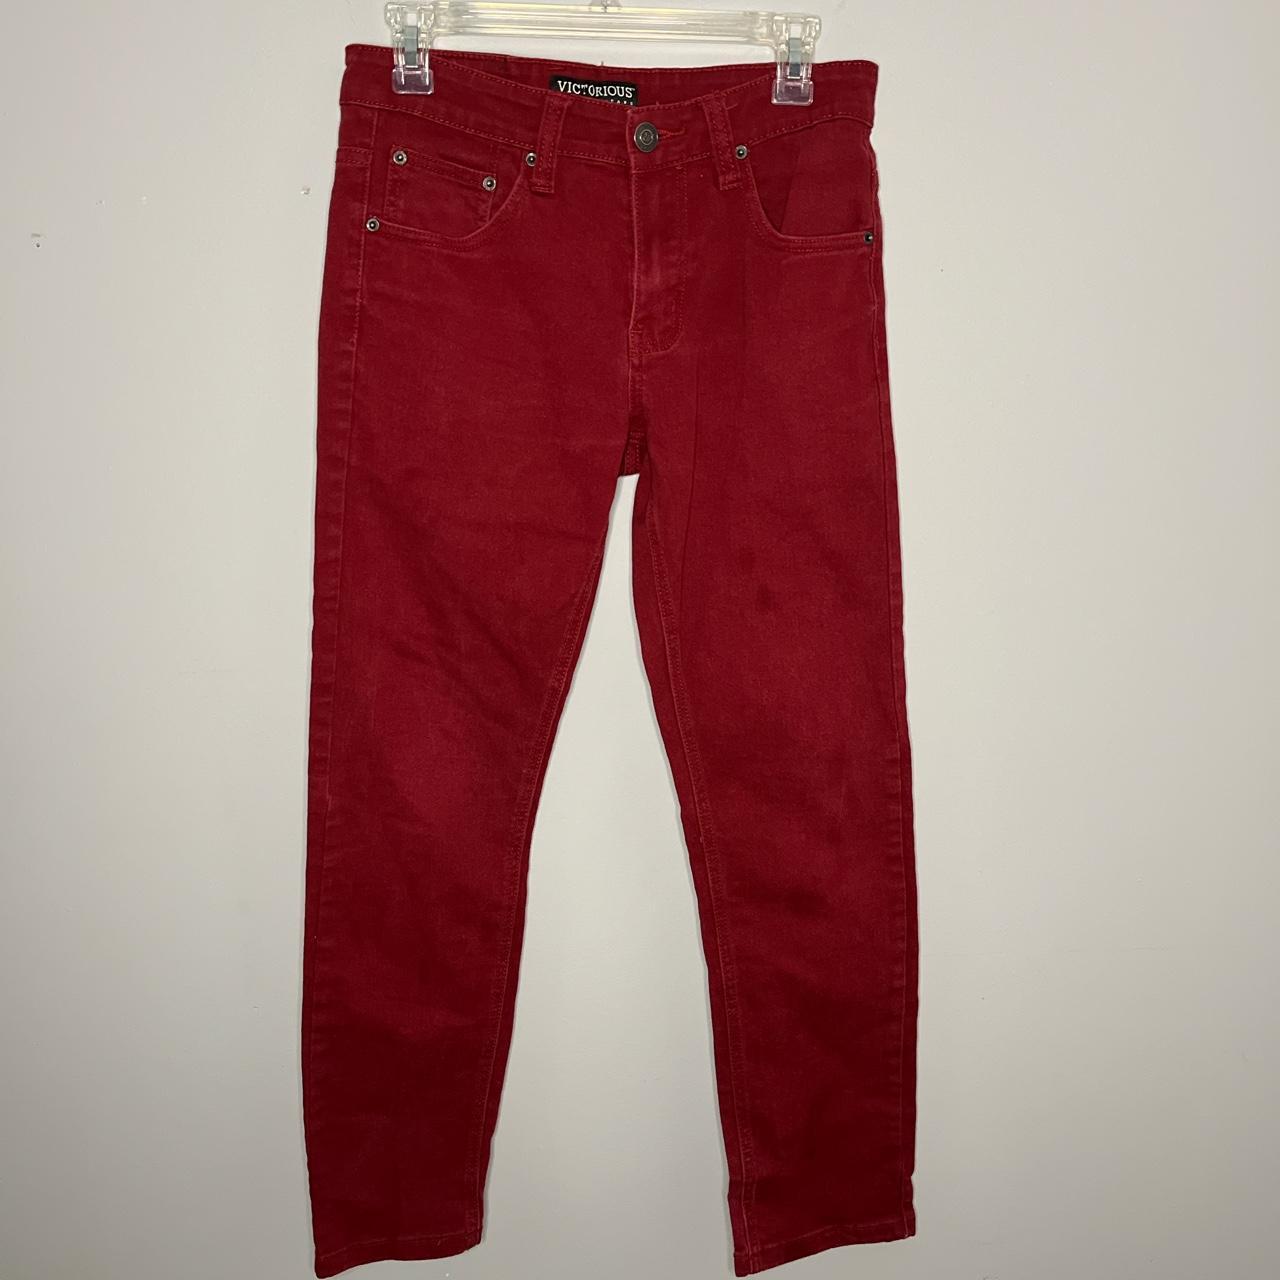 Buy Red Jeans for Men by GAS Online